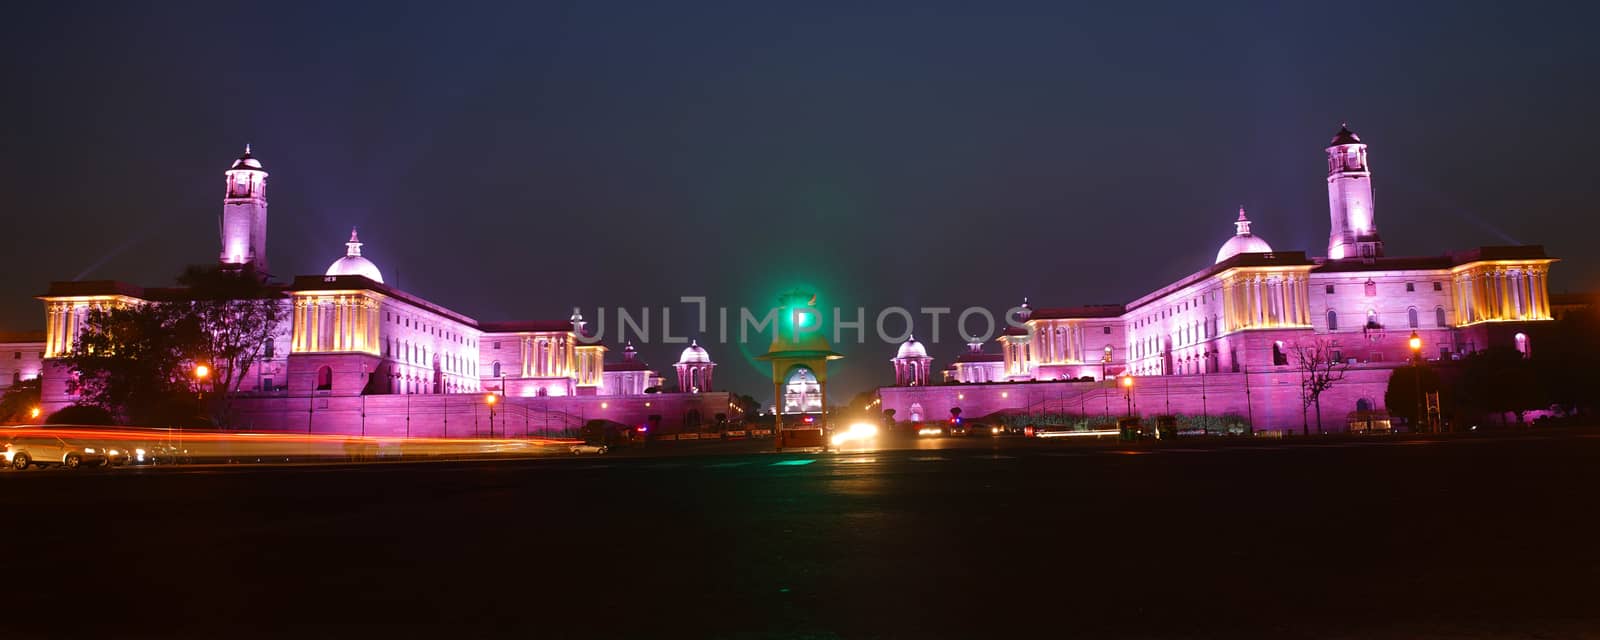 NEW DELHI, INDIA - April 26: Rashtrapati Bhavan is the official home of the President of India on April 26, 2019, New Delhi, India. by kumar3332